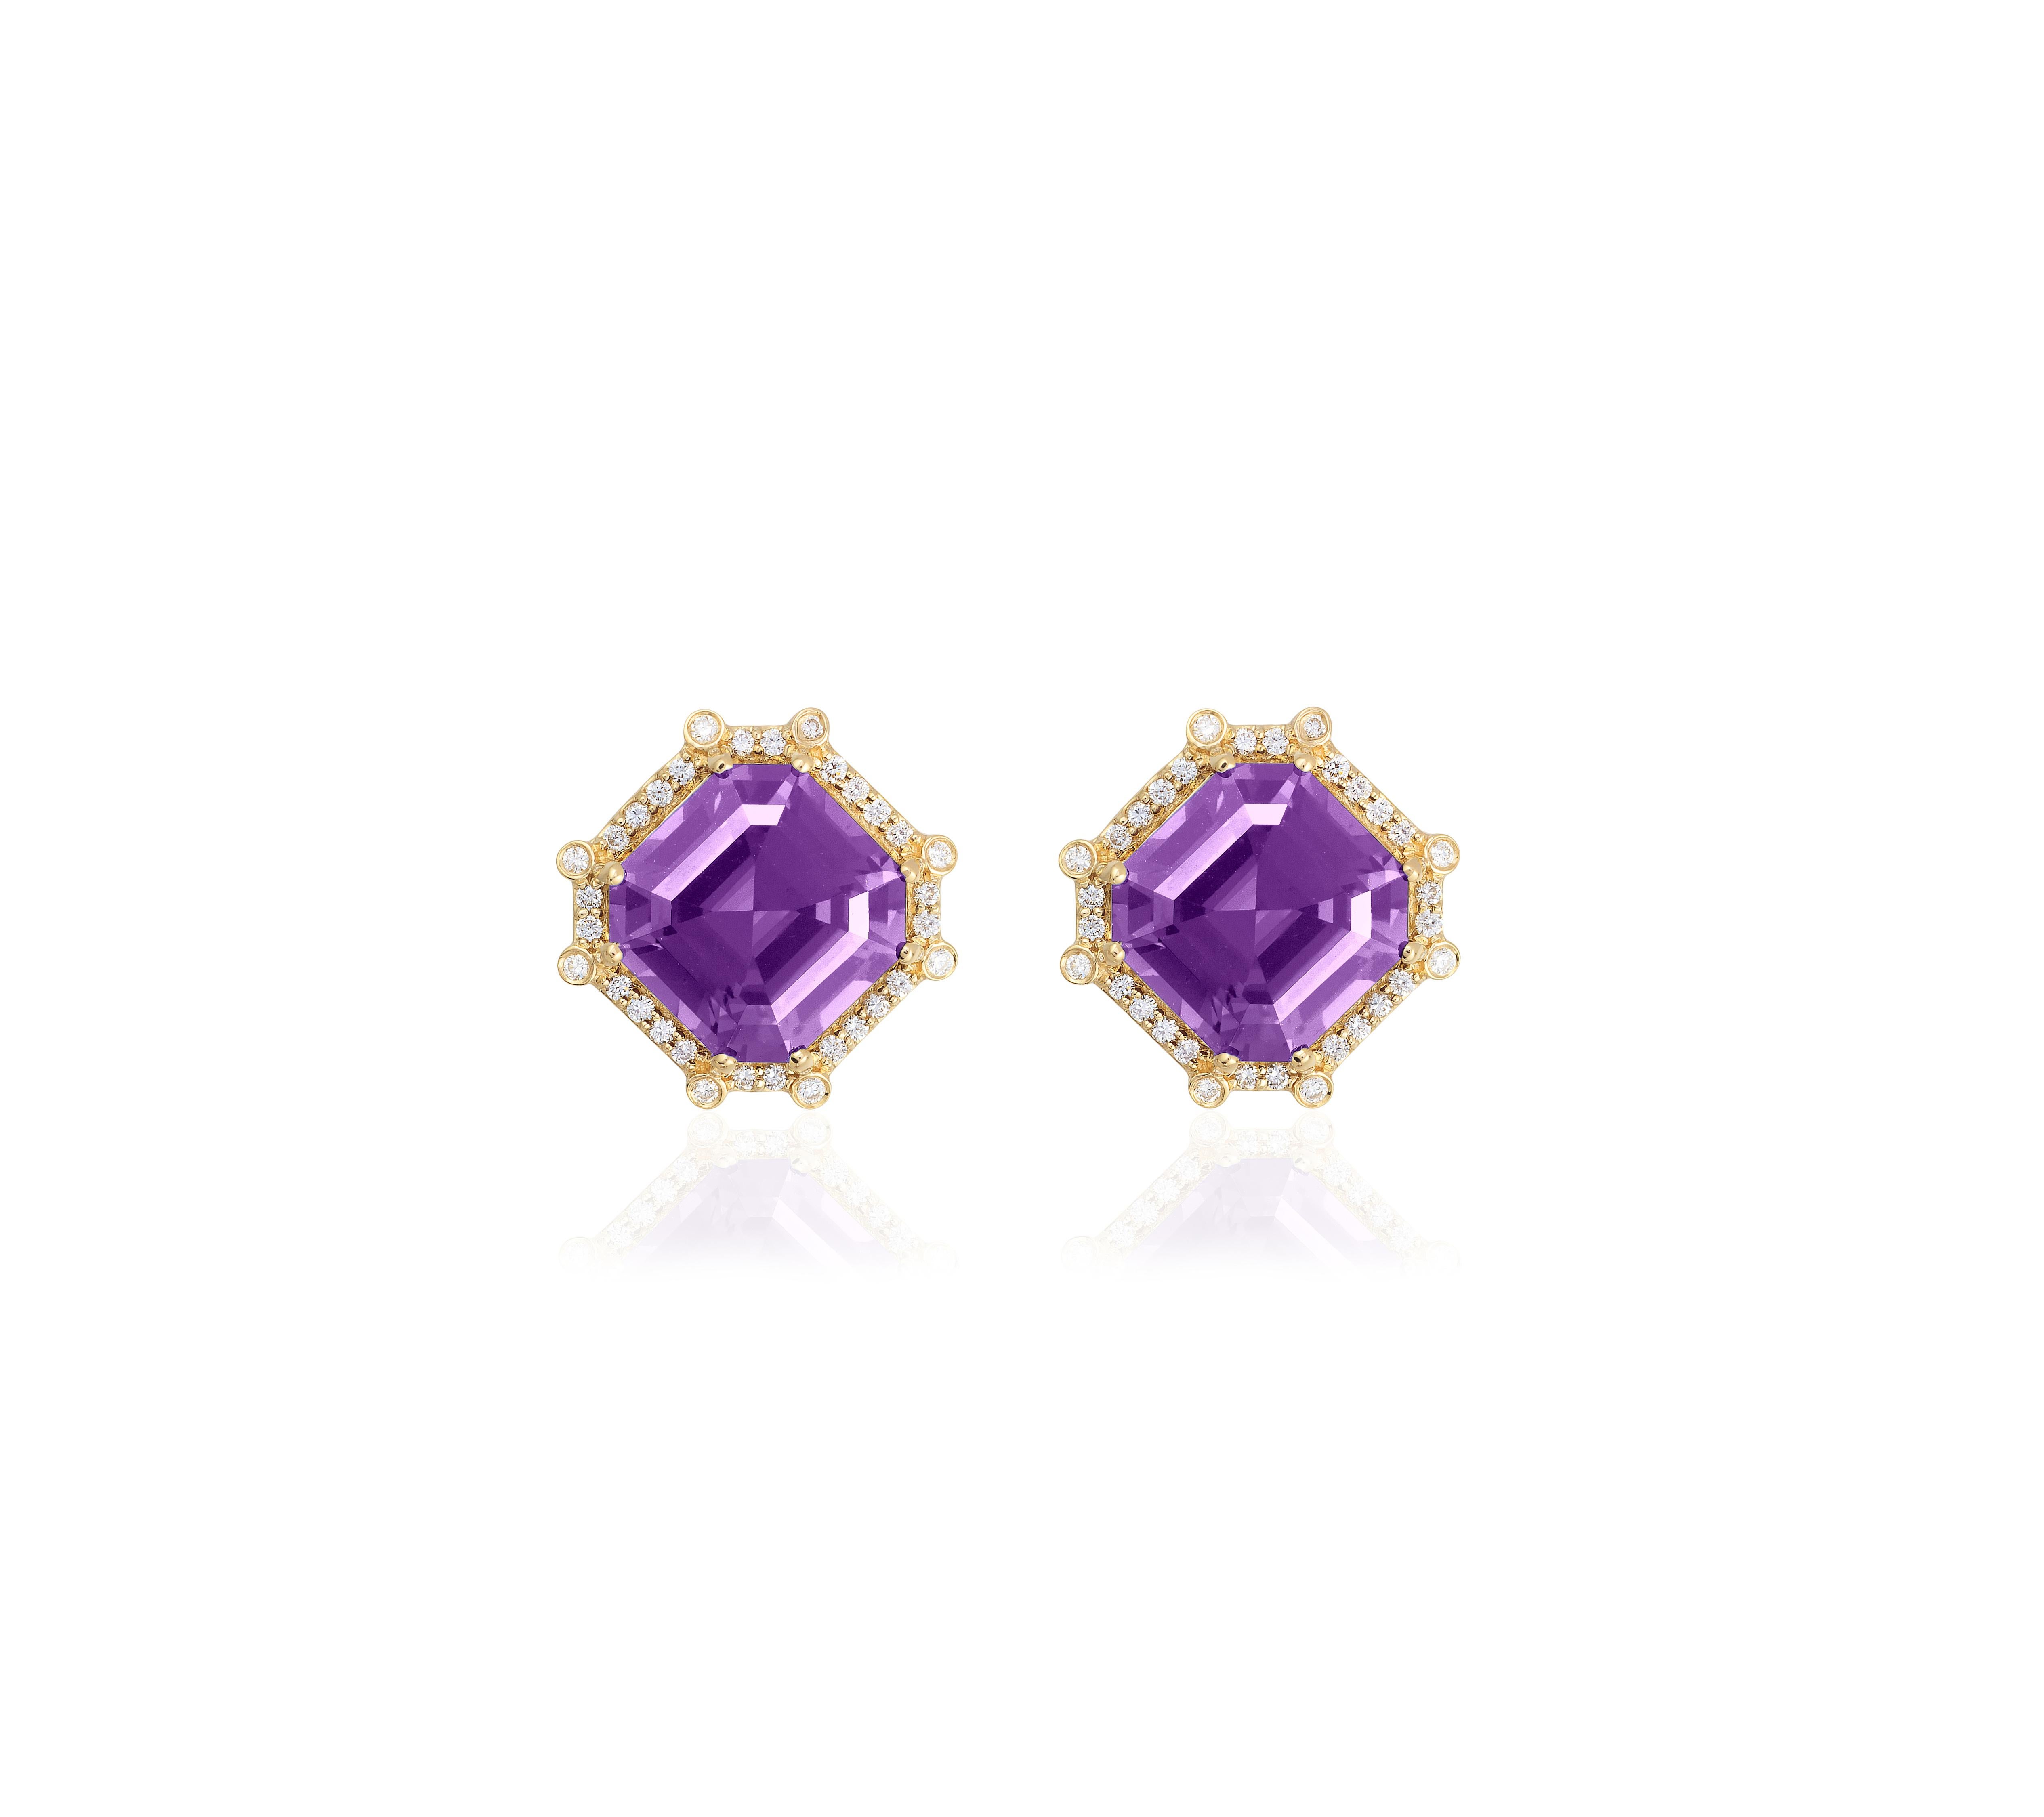 Amethyst & Diamond Octagon Studs in 18K Yellow Gold from 'Gossip' Collection
 Stone Size: 9 x 9 mm
 Diamonds: G-H / VS, Approx Wt : 0.23 Cts